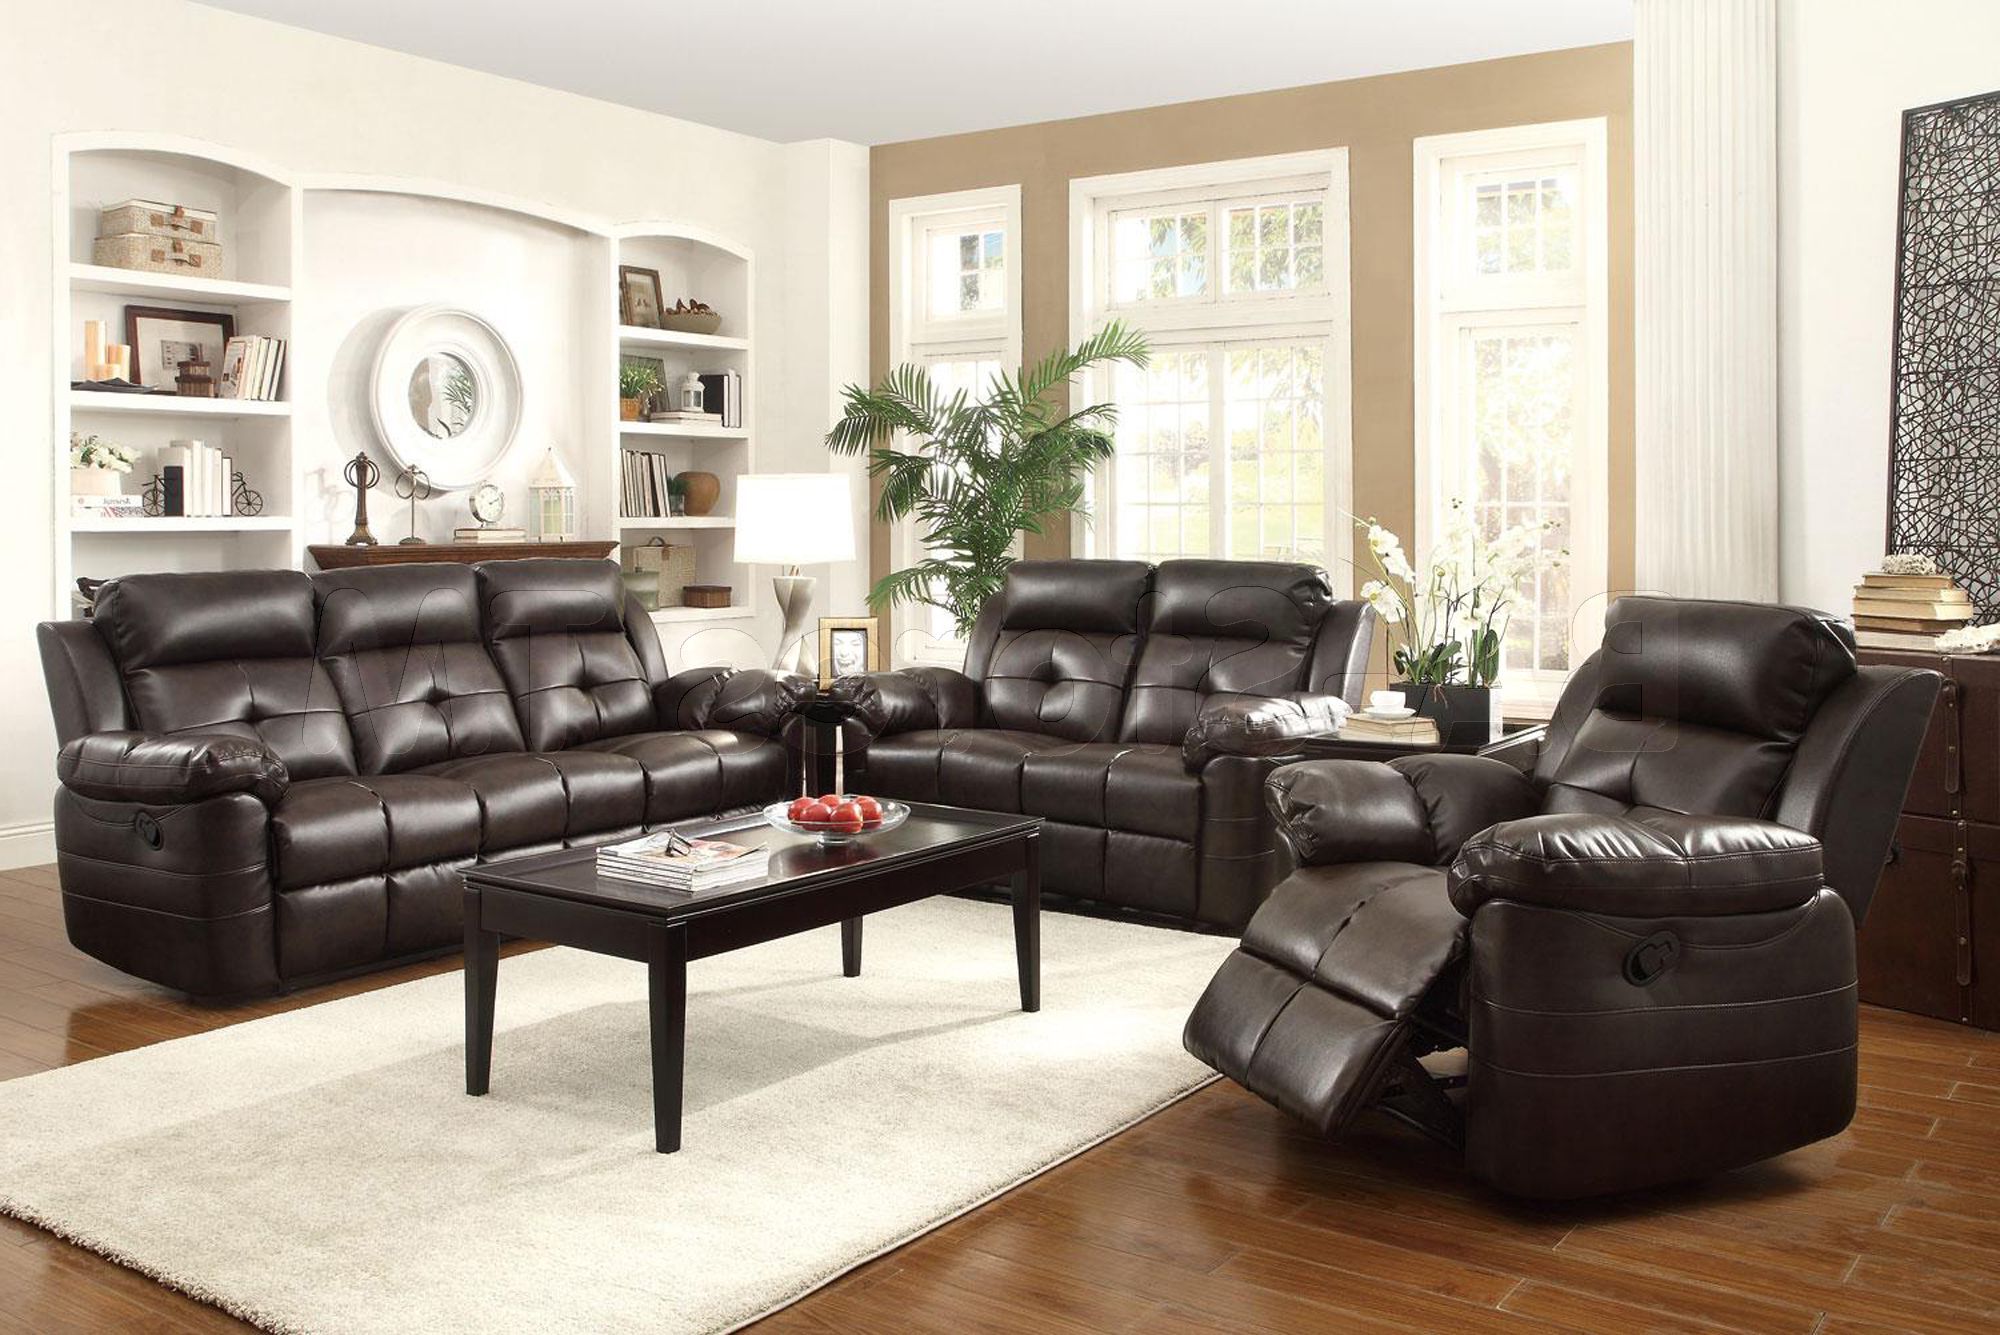 3pc Bonded Leather Upholstered Wooden Sectional Sofas Brown Intended For Well Known Keating Dark Brown Bonded Leather Match 3 Pc Motion Sofa (View 15 of 20)